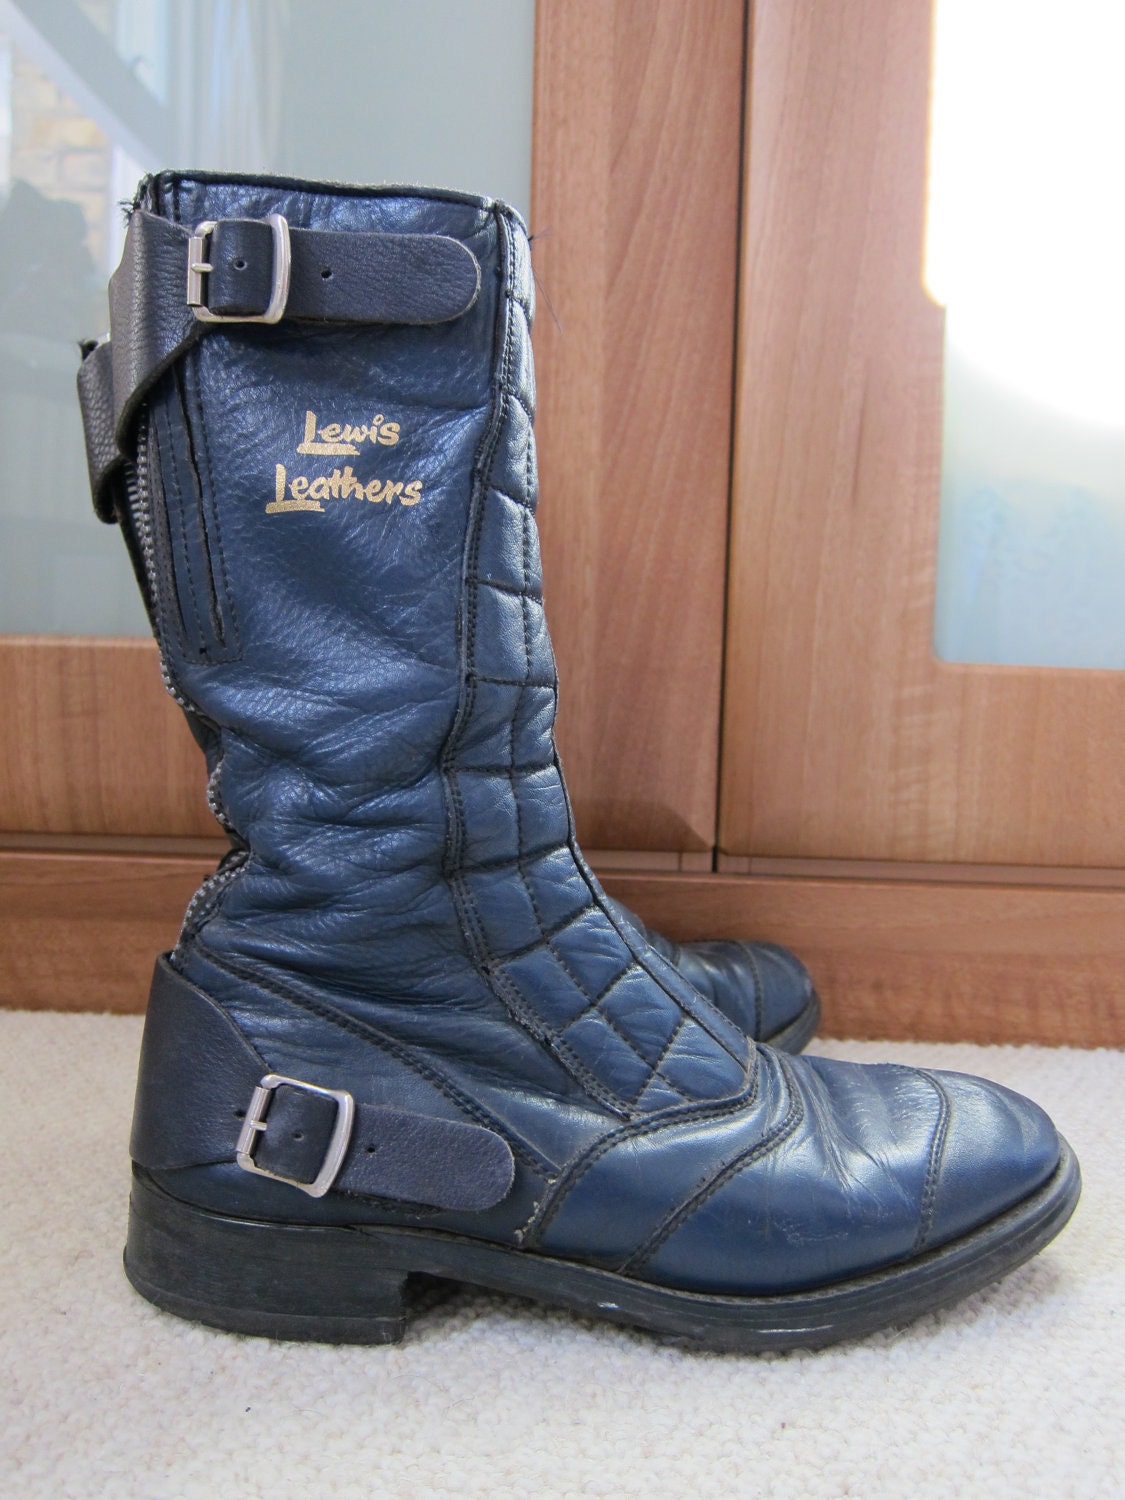 Lewis Leather Quilted British Motocycle Biker Boots in Navy with Buckles, Size UK 5-6, Mod, Scooter, Rocker, Goth, Grunge